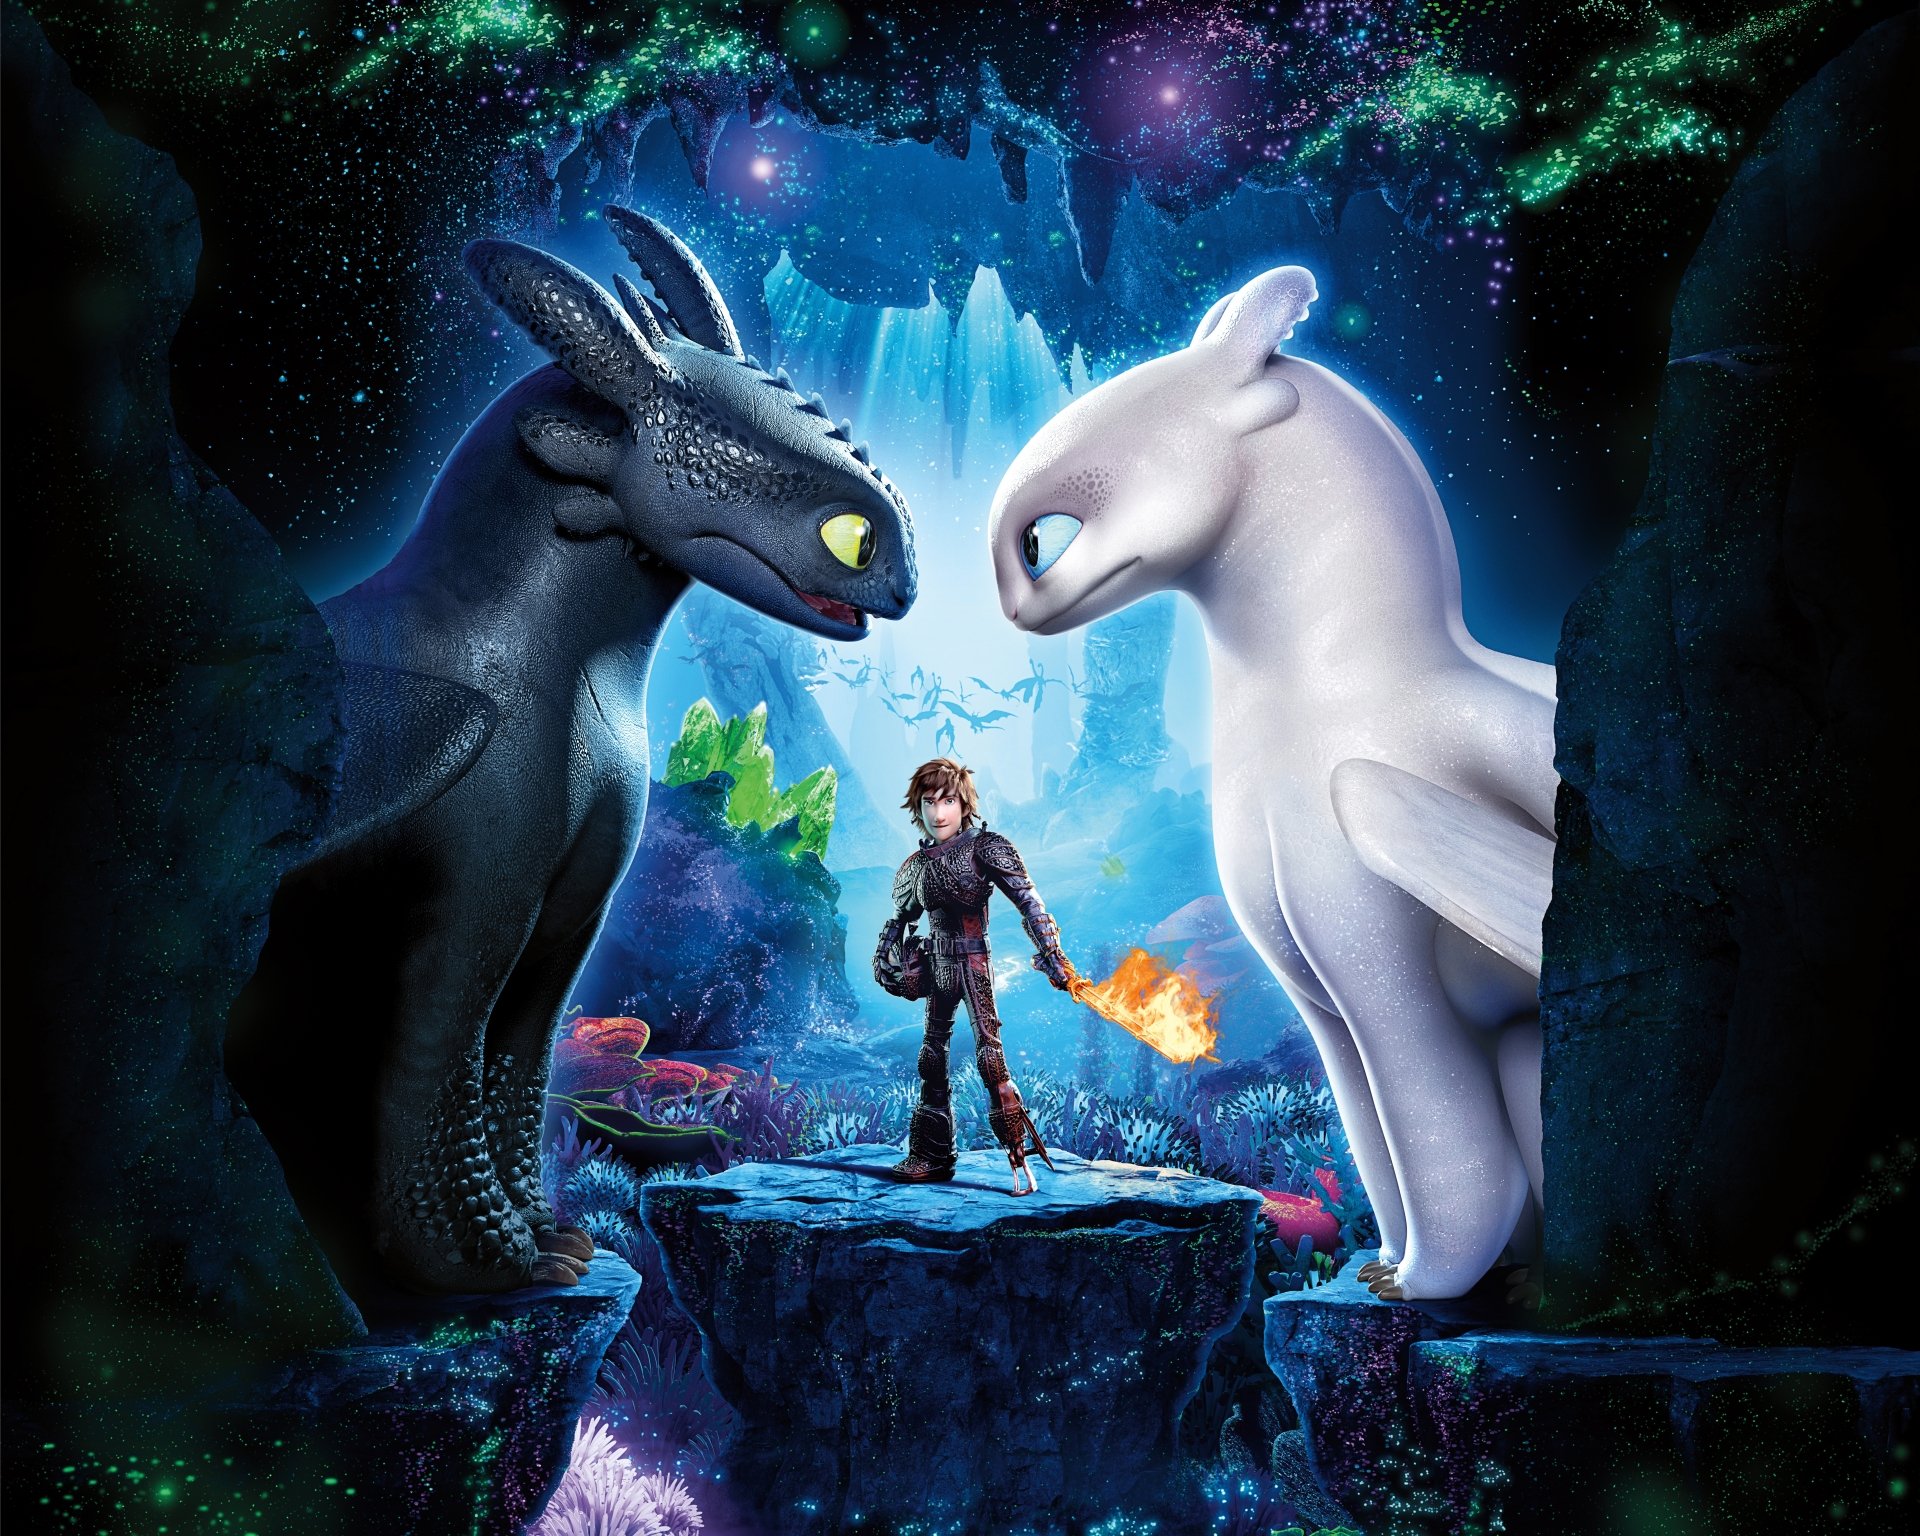 how to train your dragon wallpaper,fictional character,illustration,animation,animated cartoon,fiction